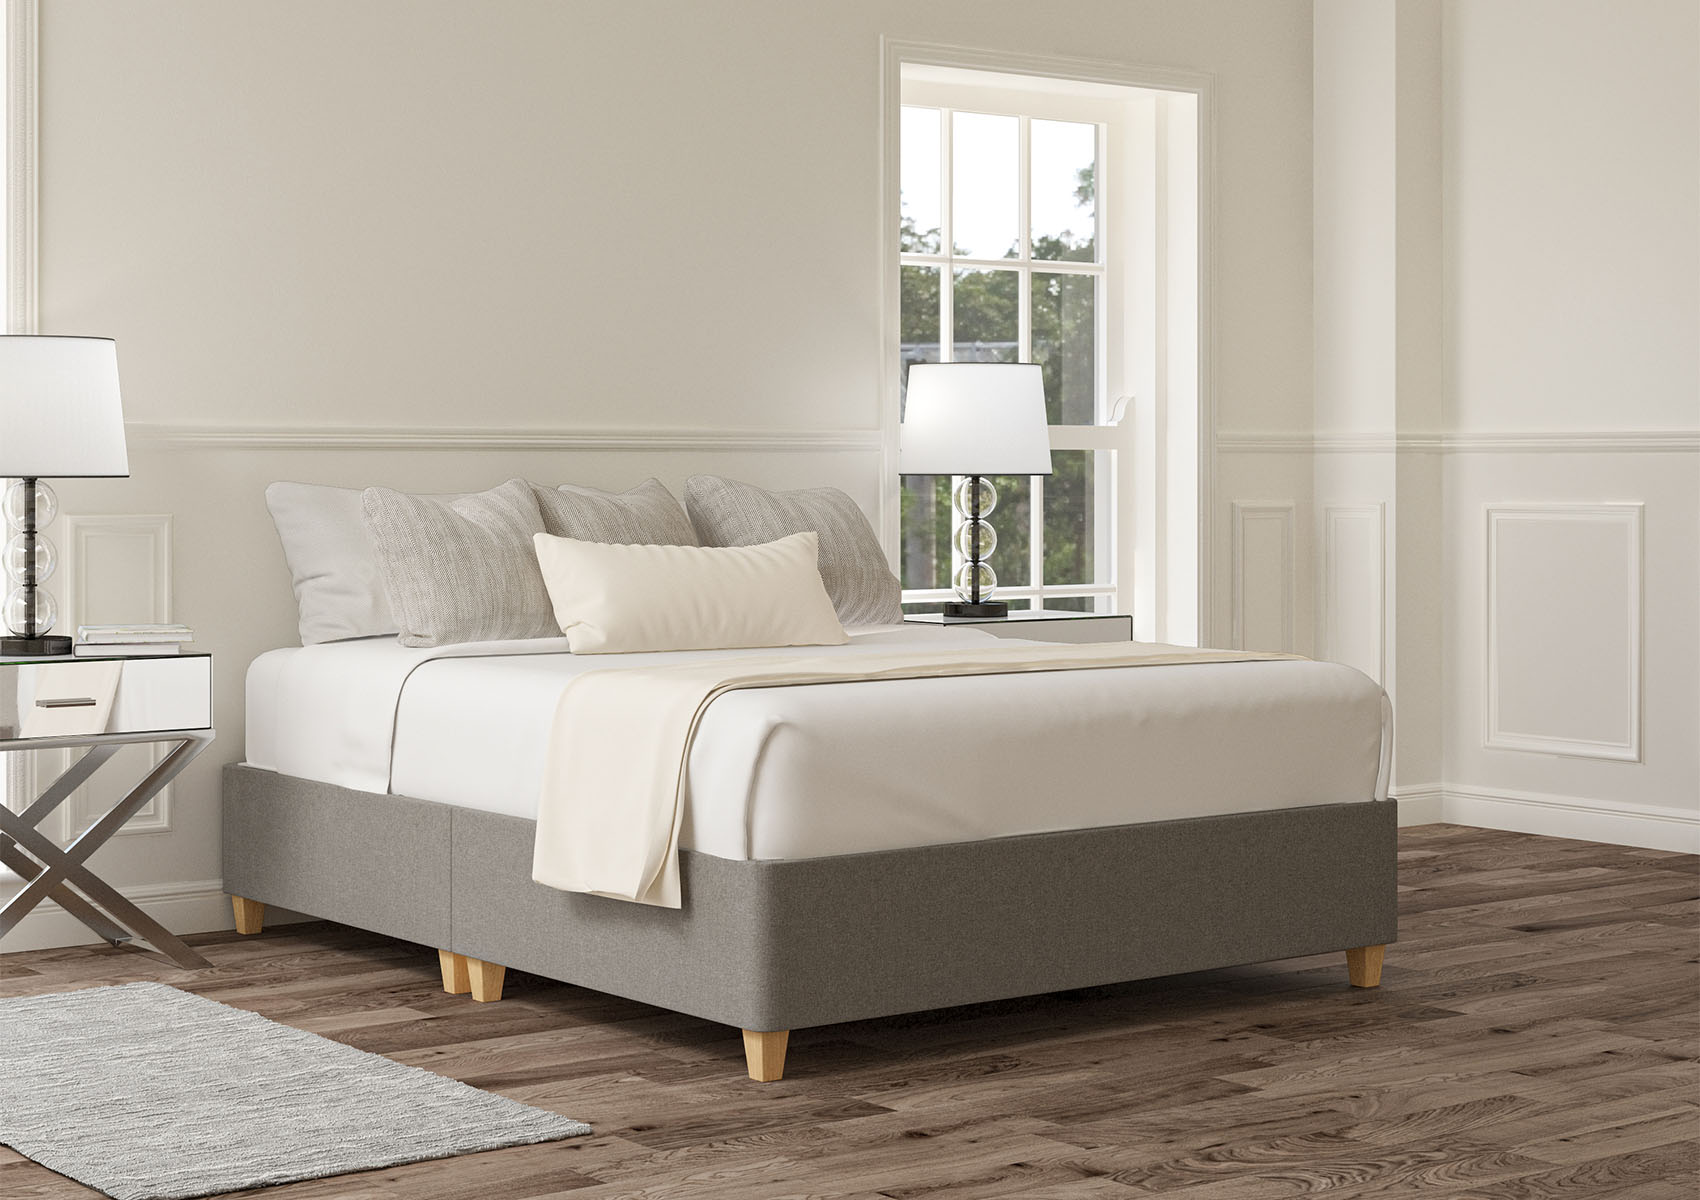 View Shallow Carina Parchment Upholstered Single Divan Bed Time4Sleep information